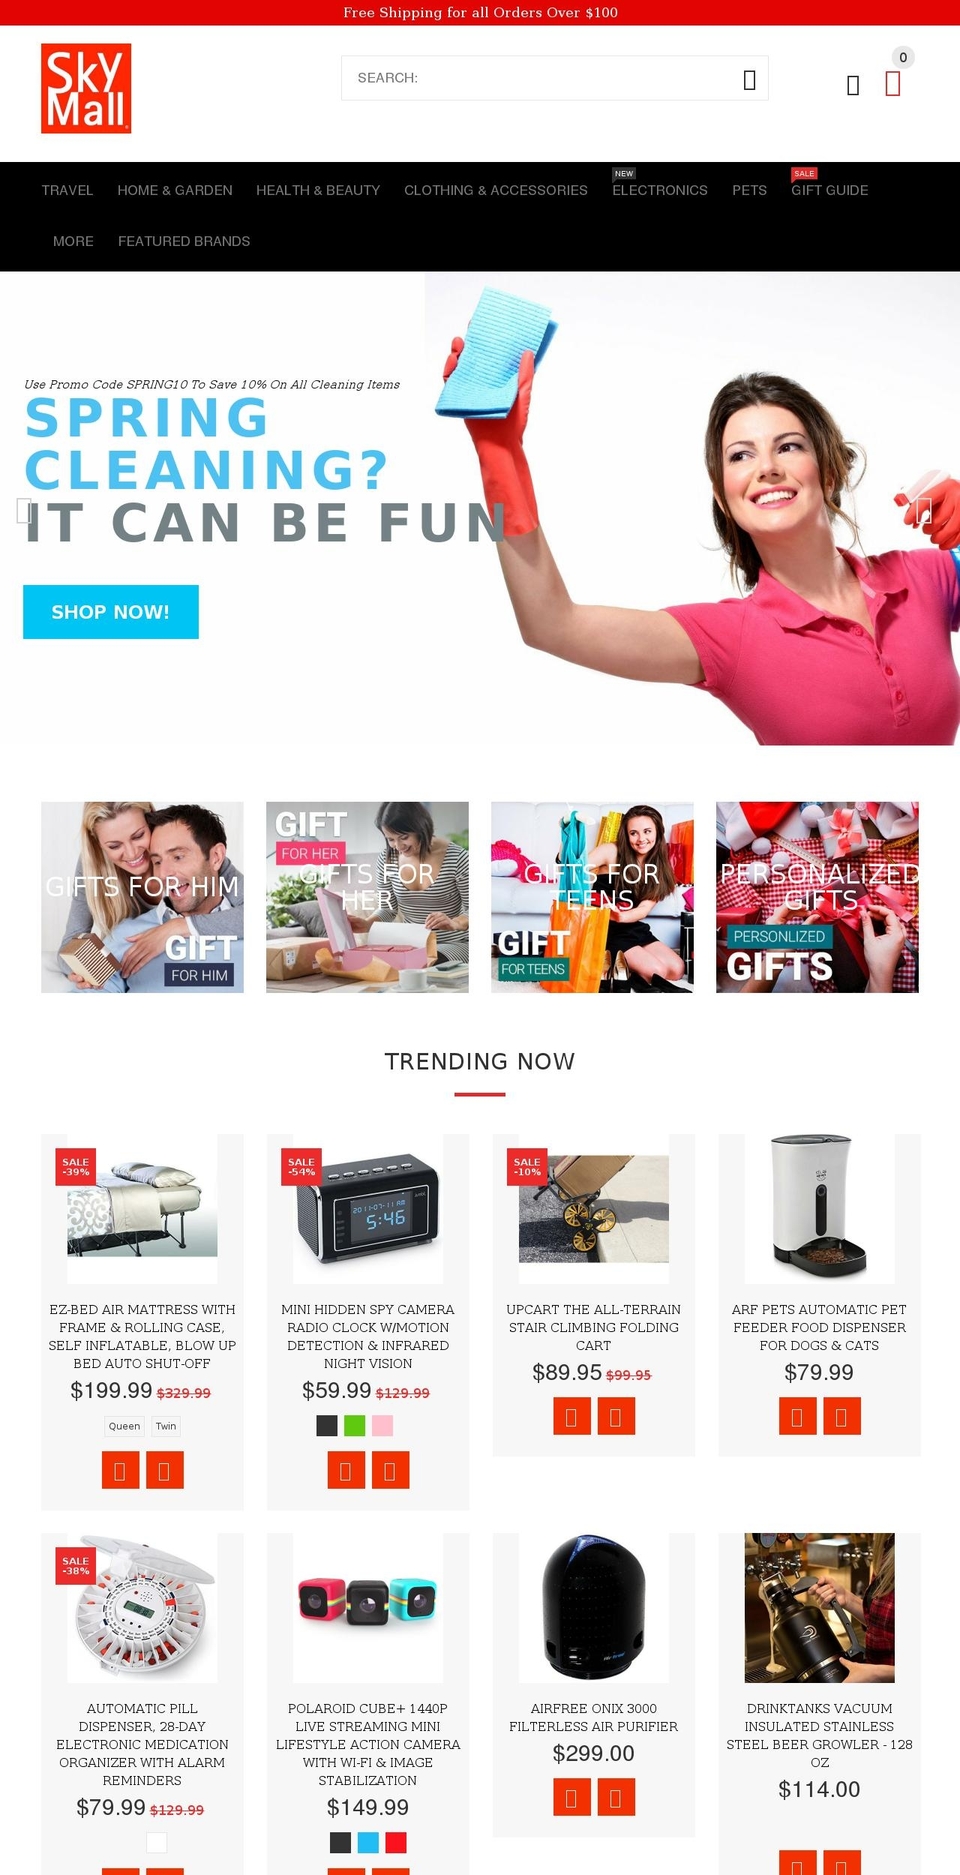 YourStore-V2-0-1A Shopify theme site example skymallinflight.me